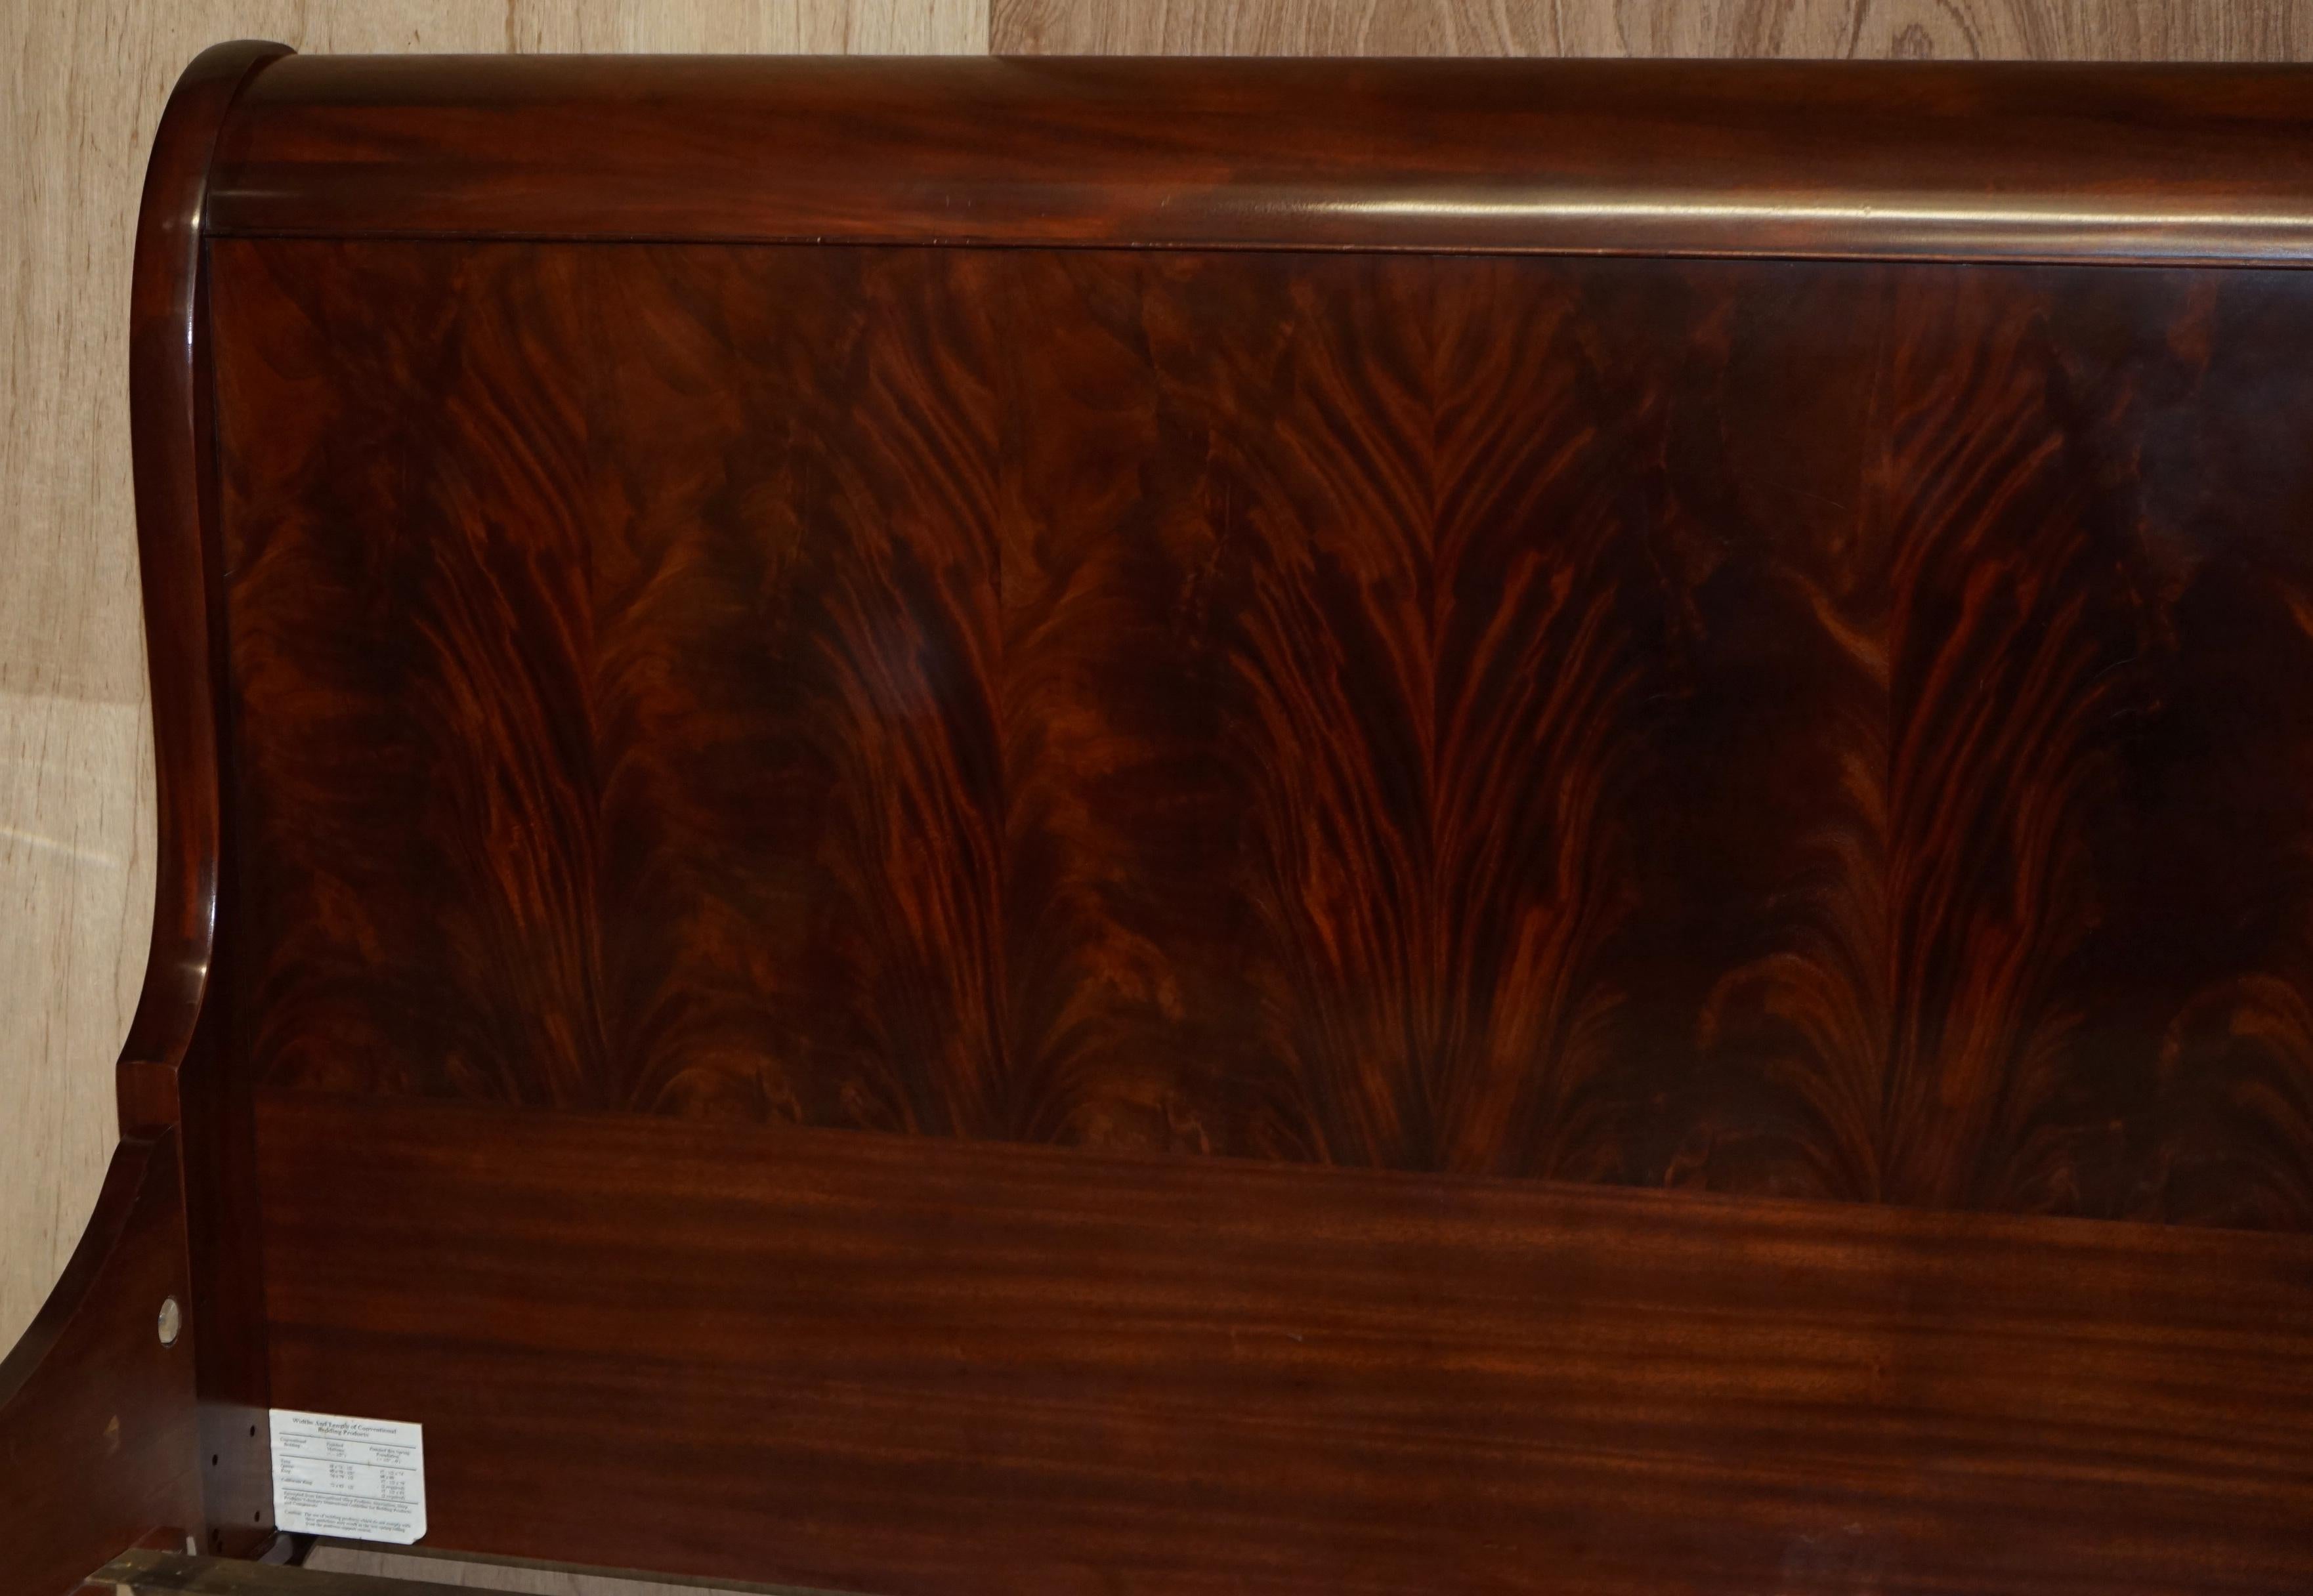 Hand-Crafted Huge Ralph Lauren Larger Than California King American Hardwood Sleigh Bed Frame